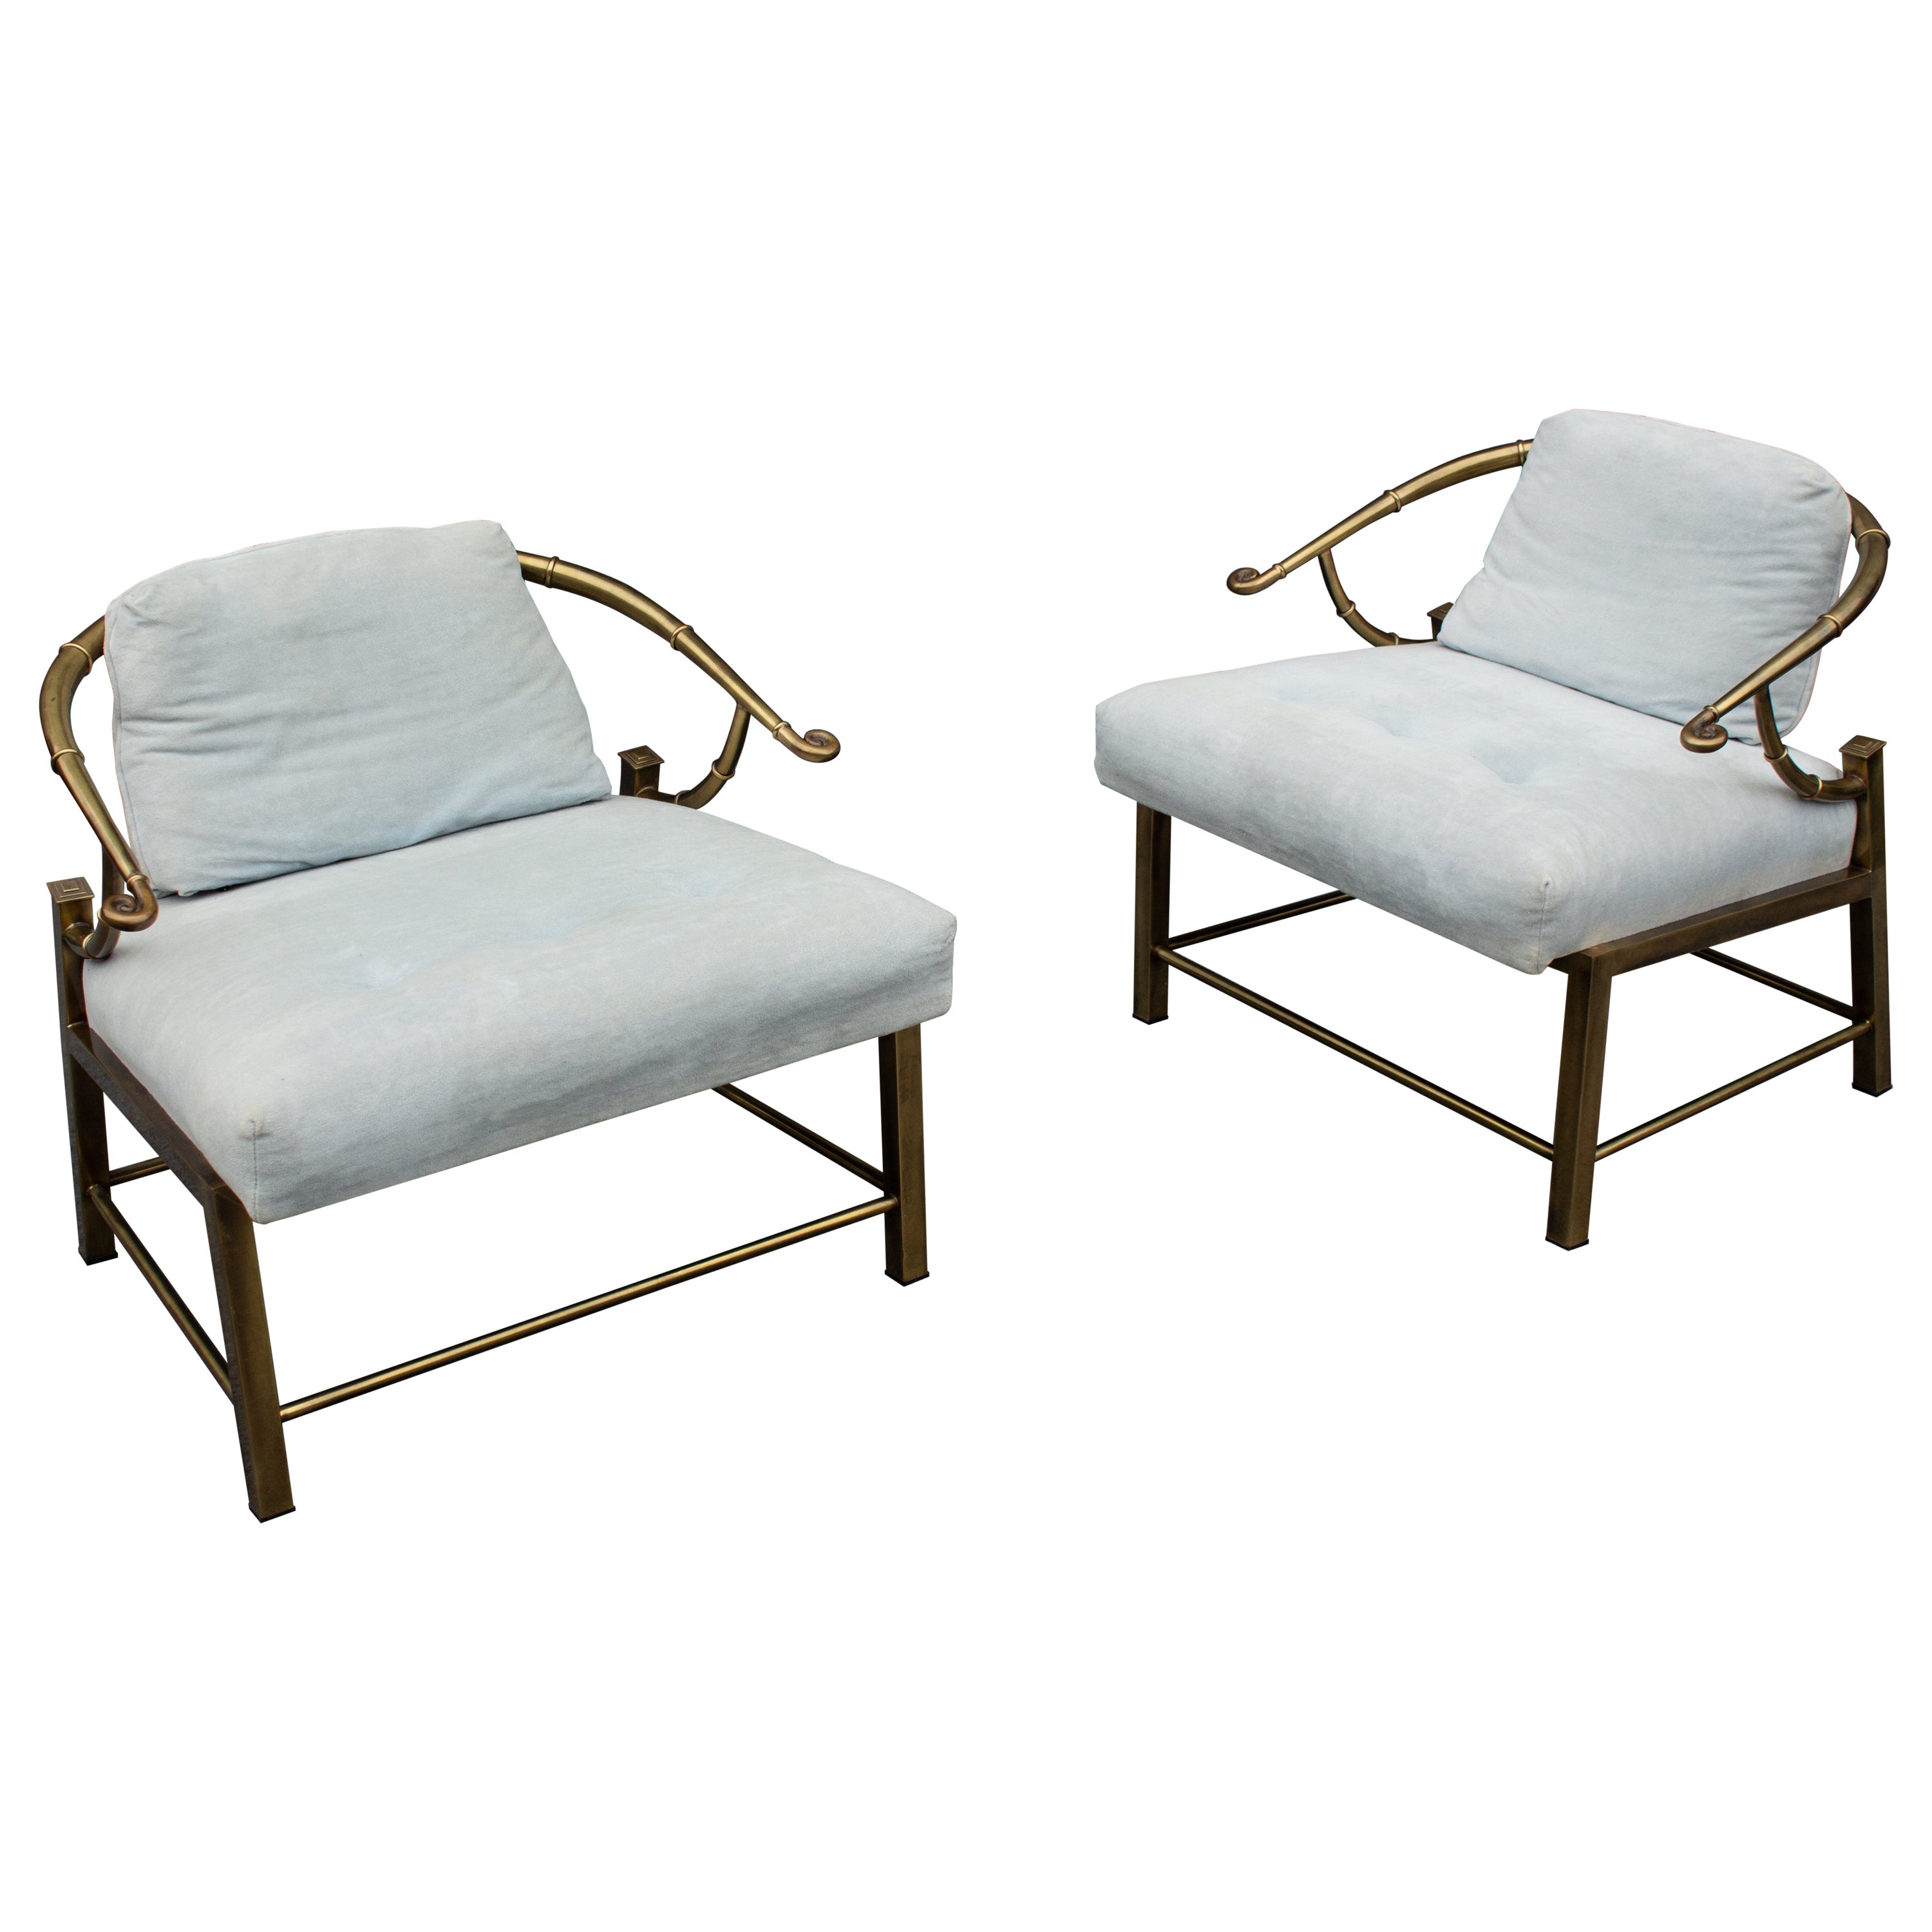 Pair of Warren Lloyd for Mastercraft Brass & White Fabric Empress Lounge Chairs For Sale